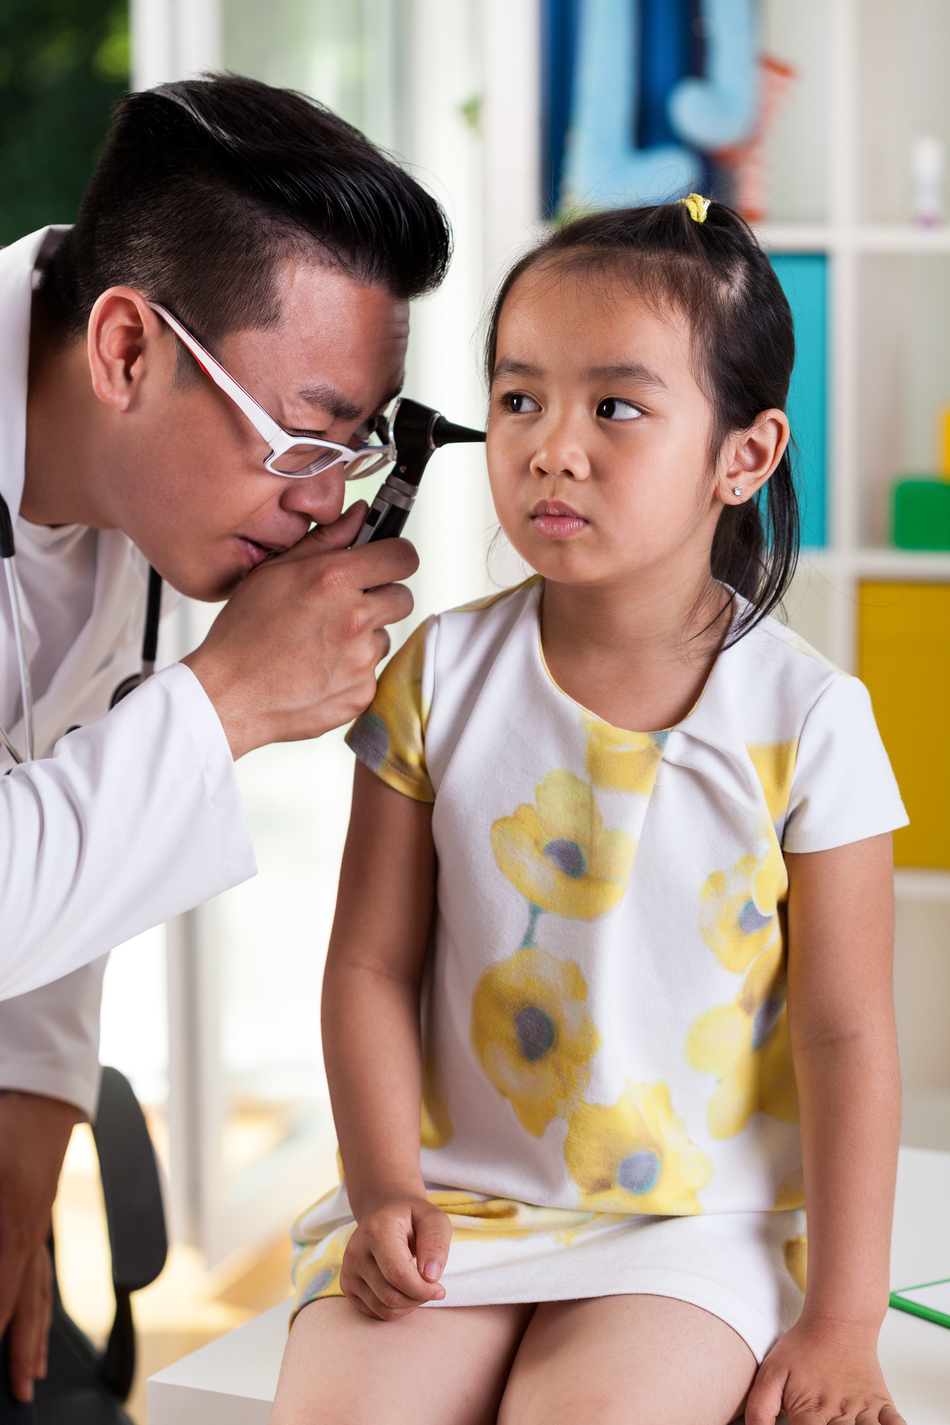 Preventing Ear Infections in Young Children